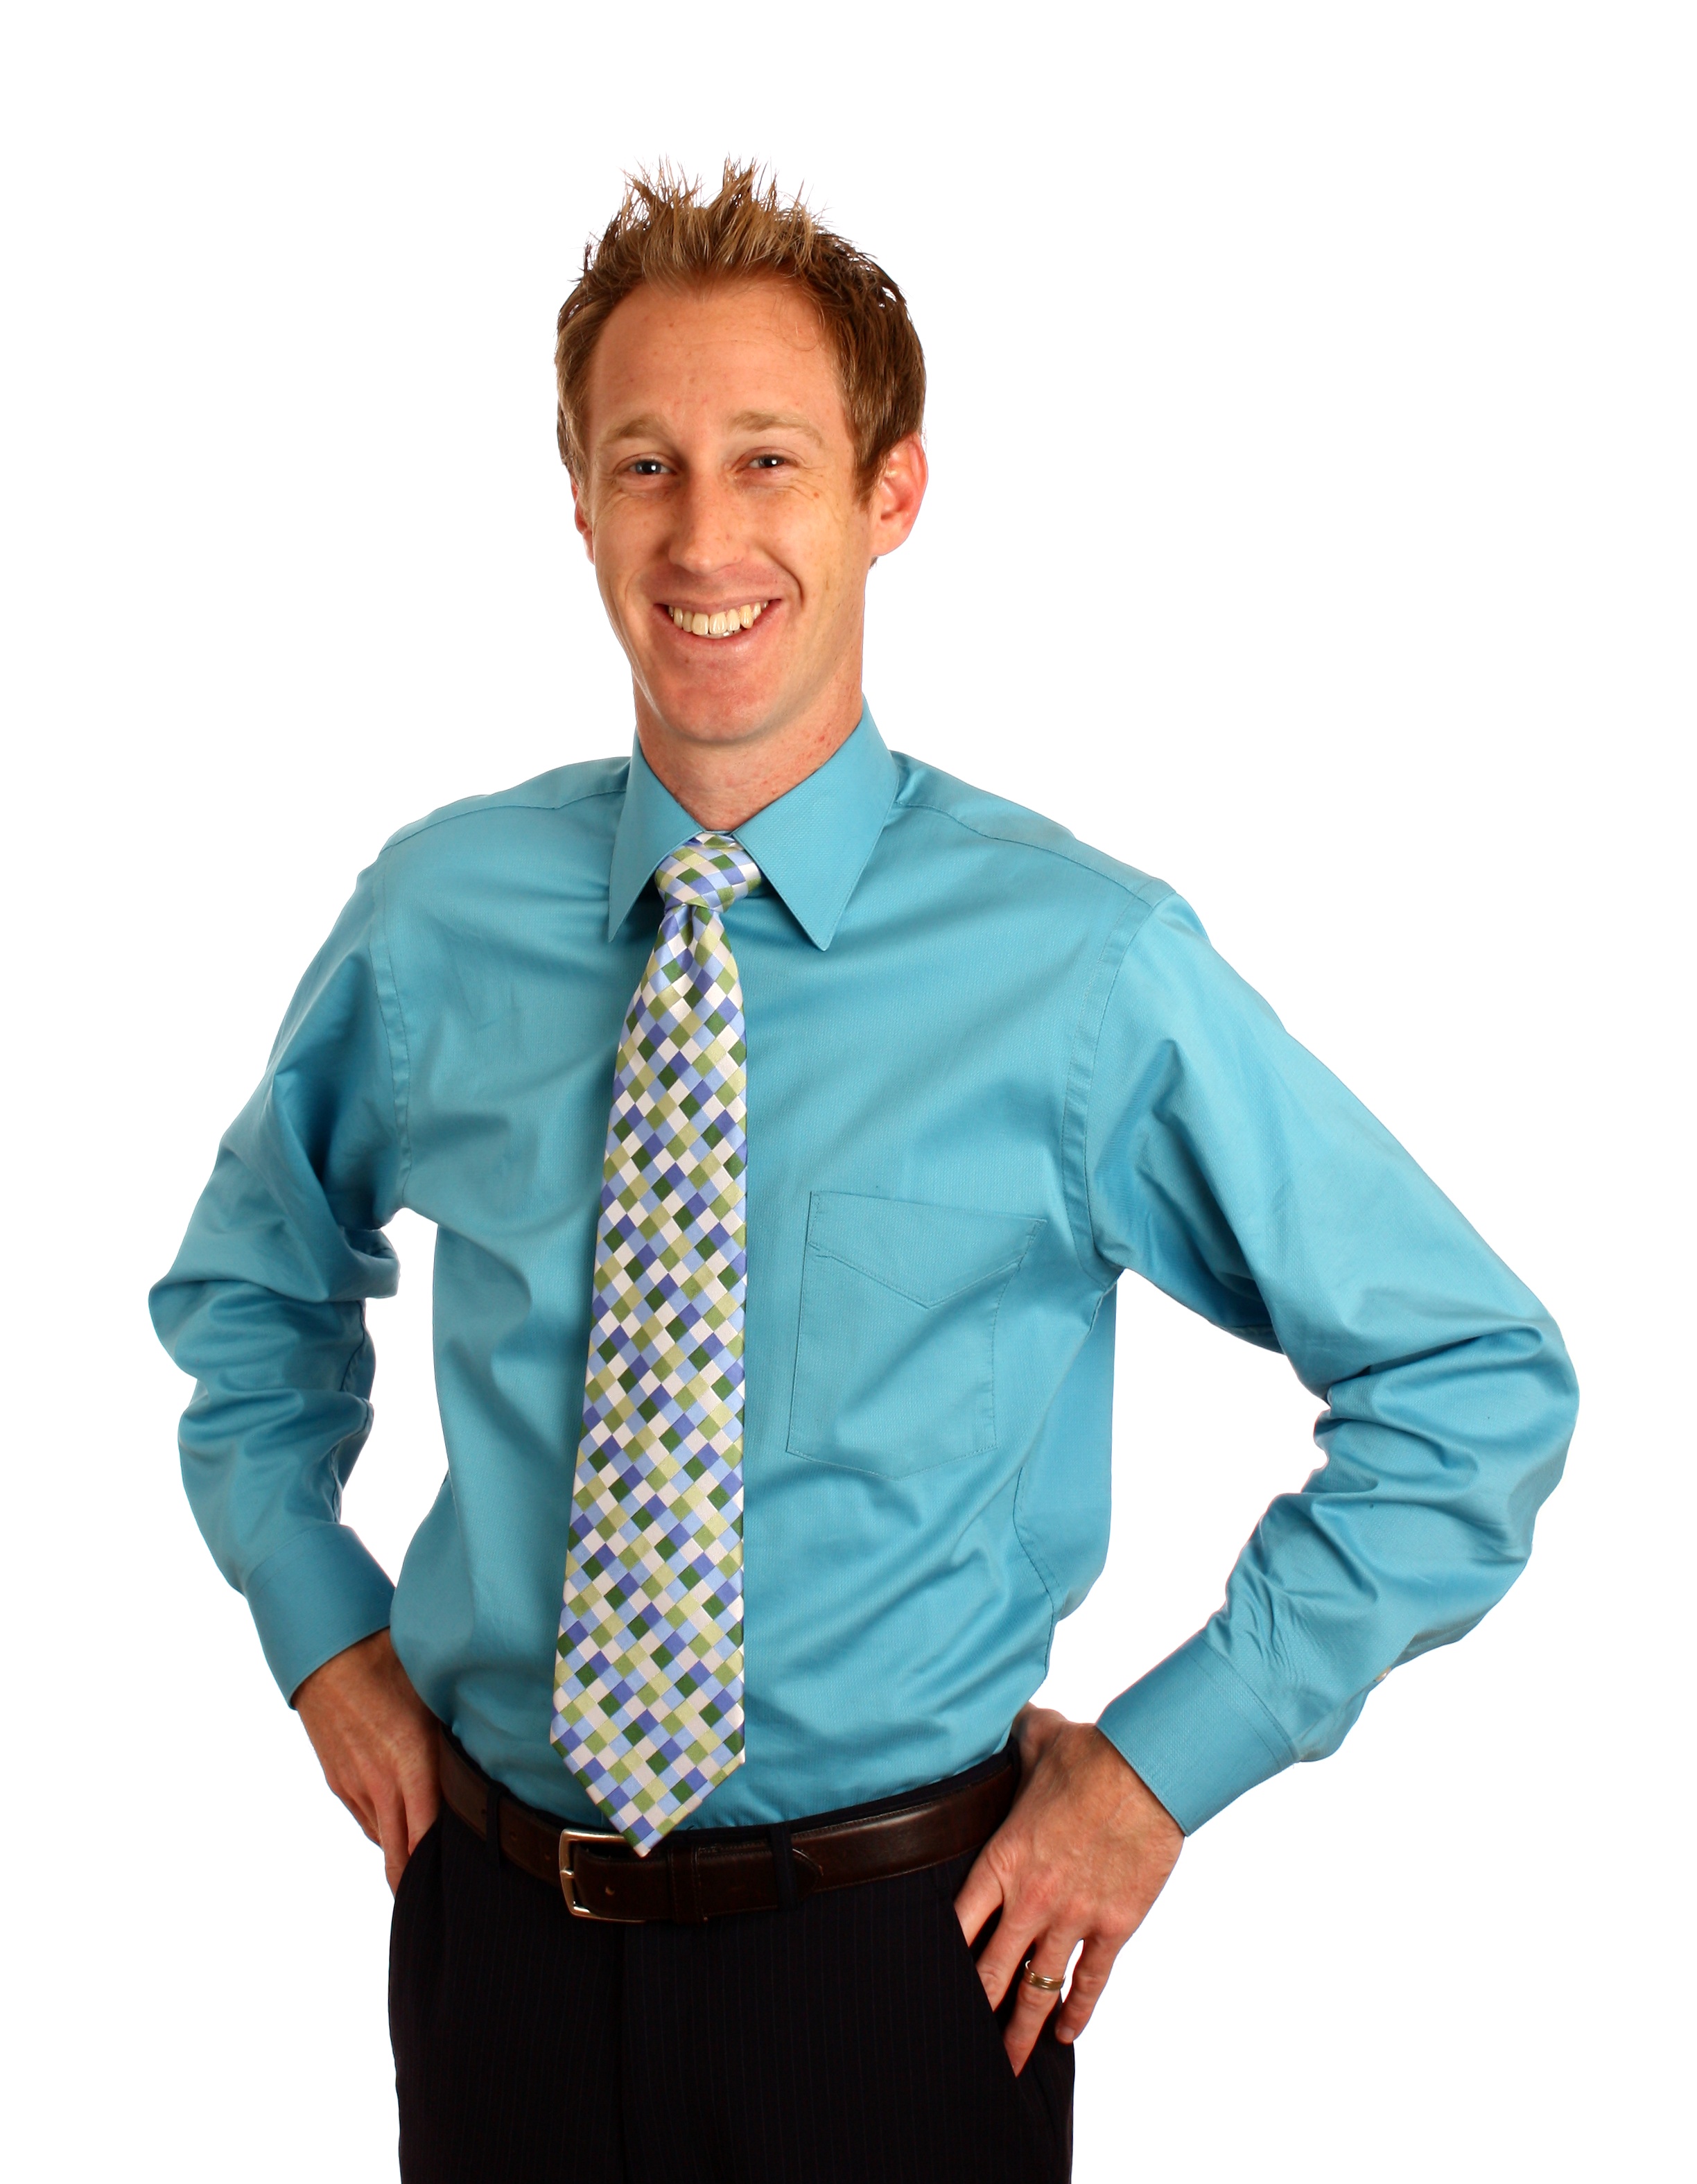 A young businessman in a tie photo